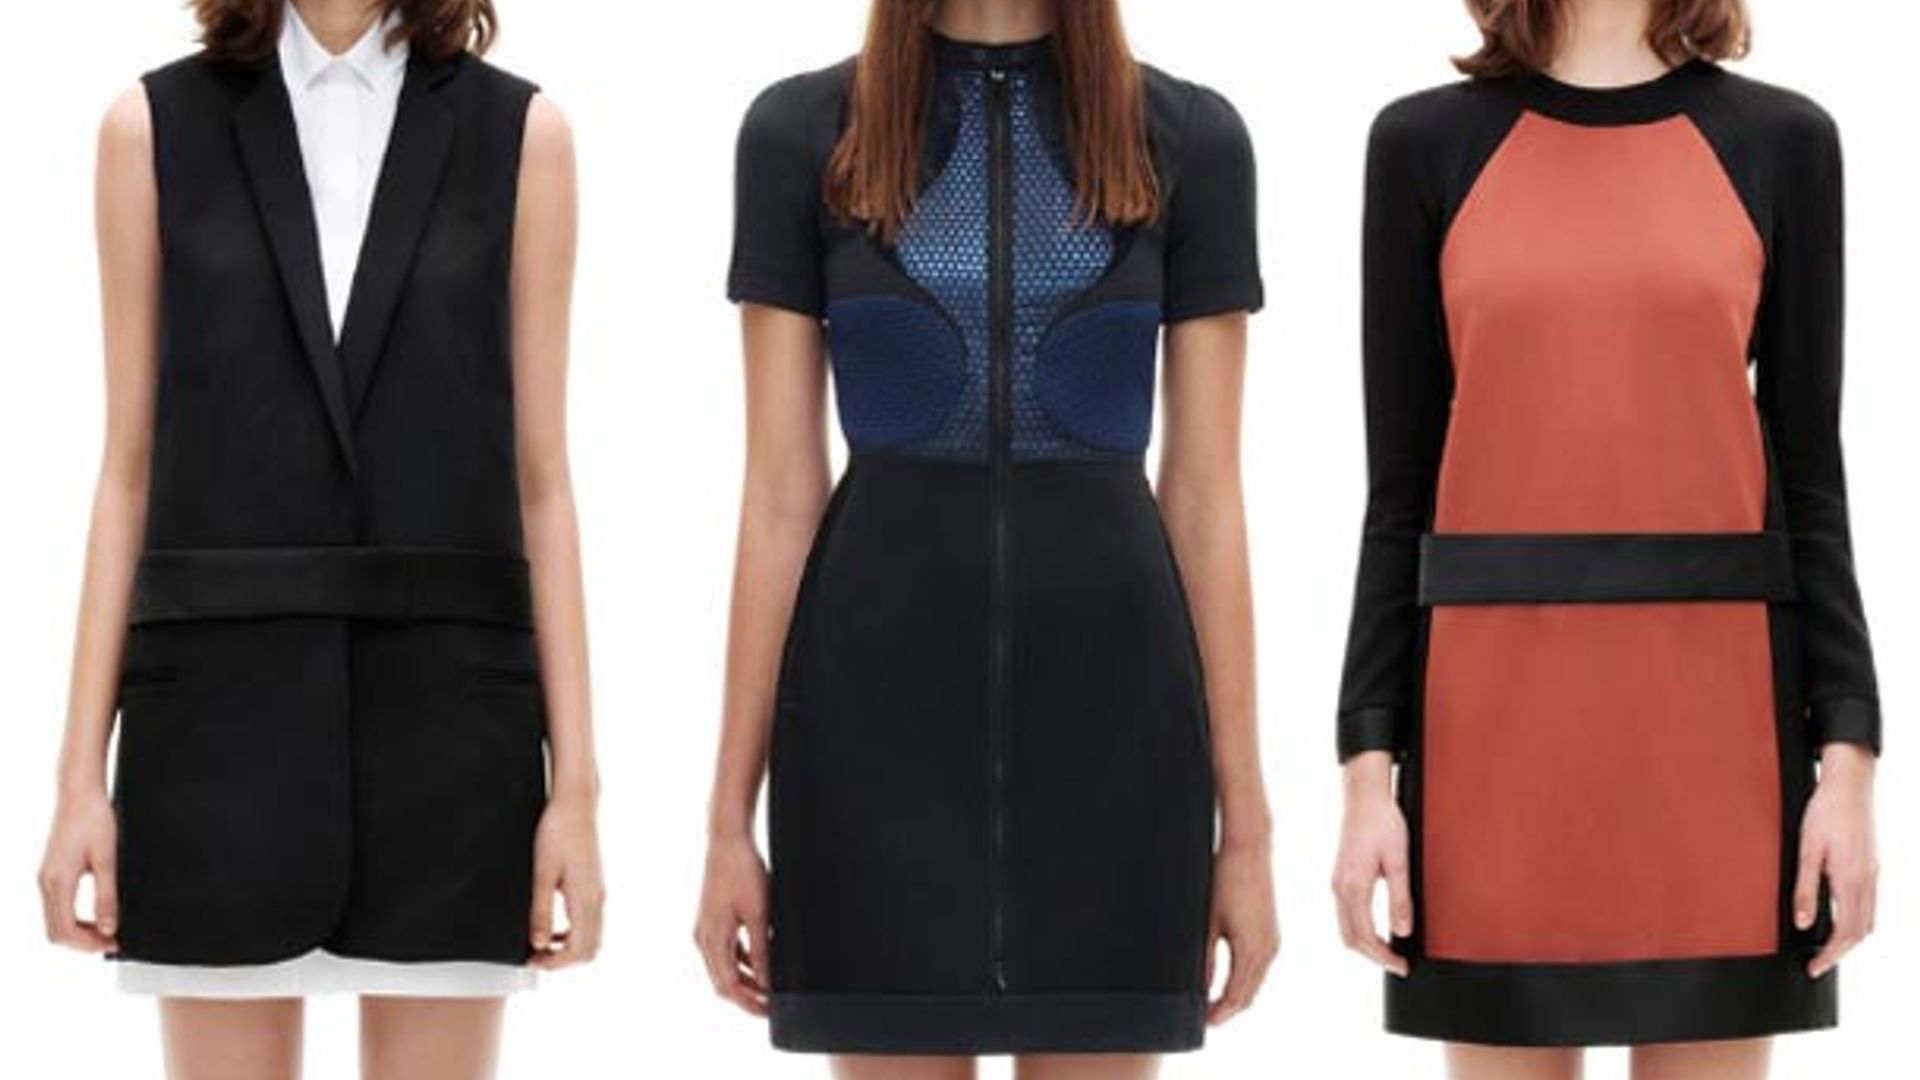 Victoria Beckham's new collection aimed at 'intellectual women'